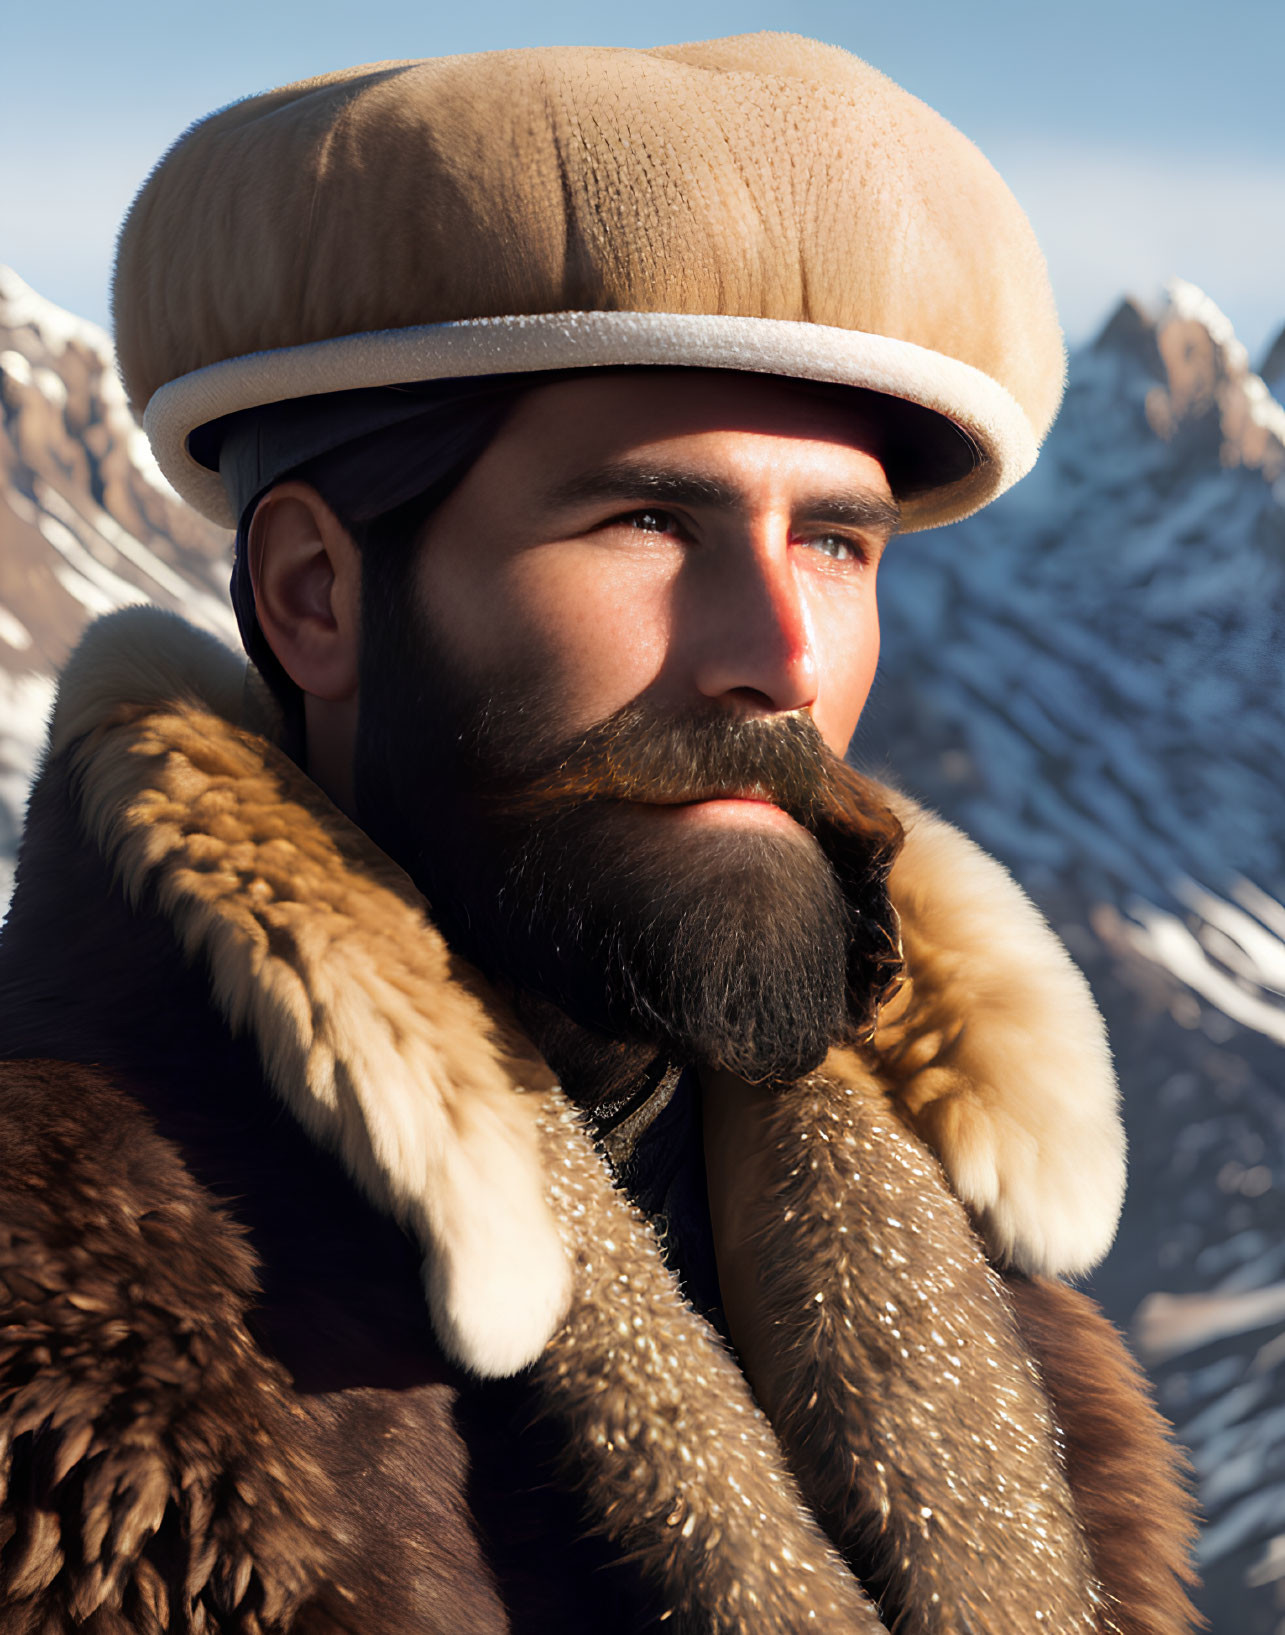 Bearded man in fur hat and coat with mountain background